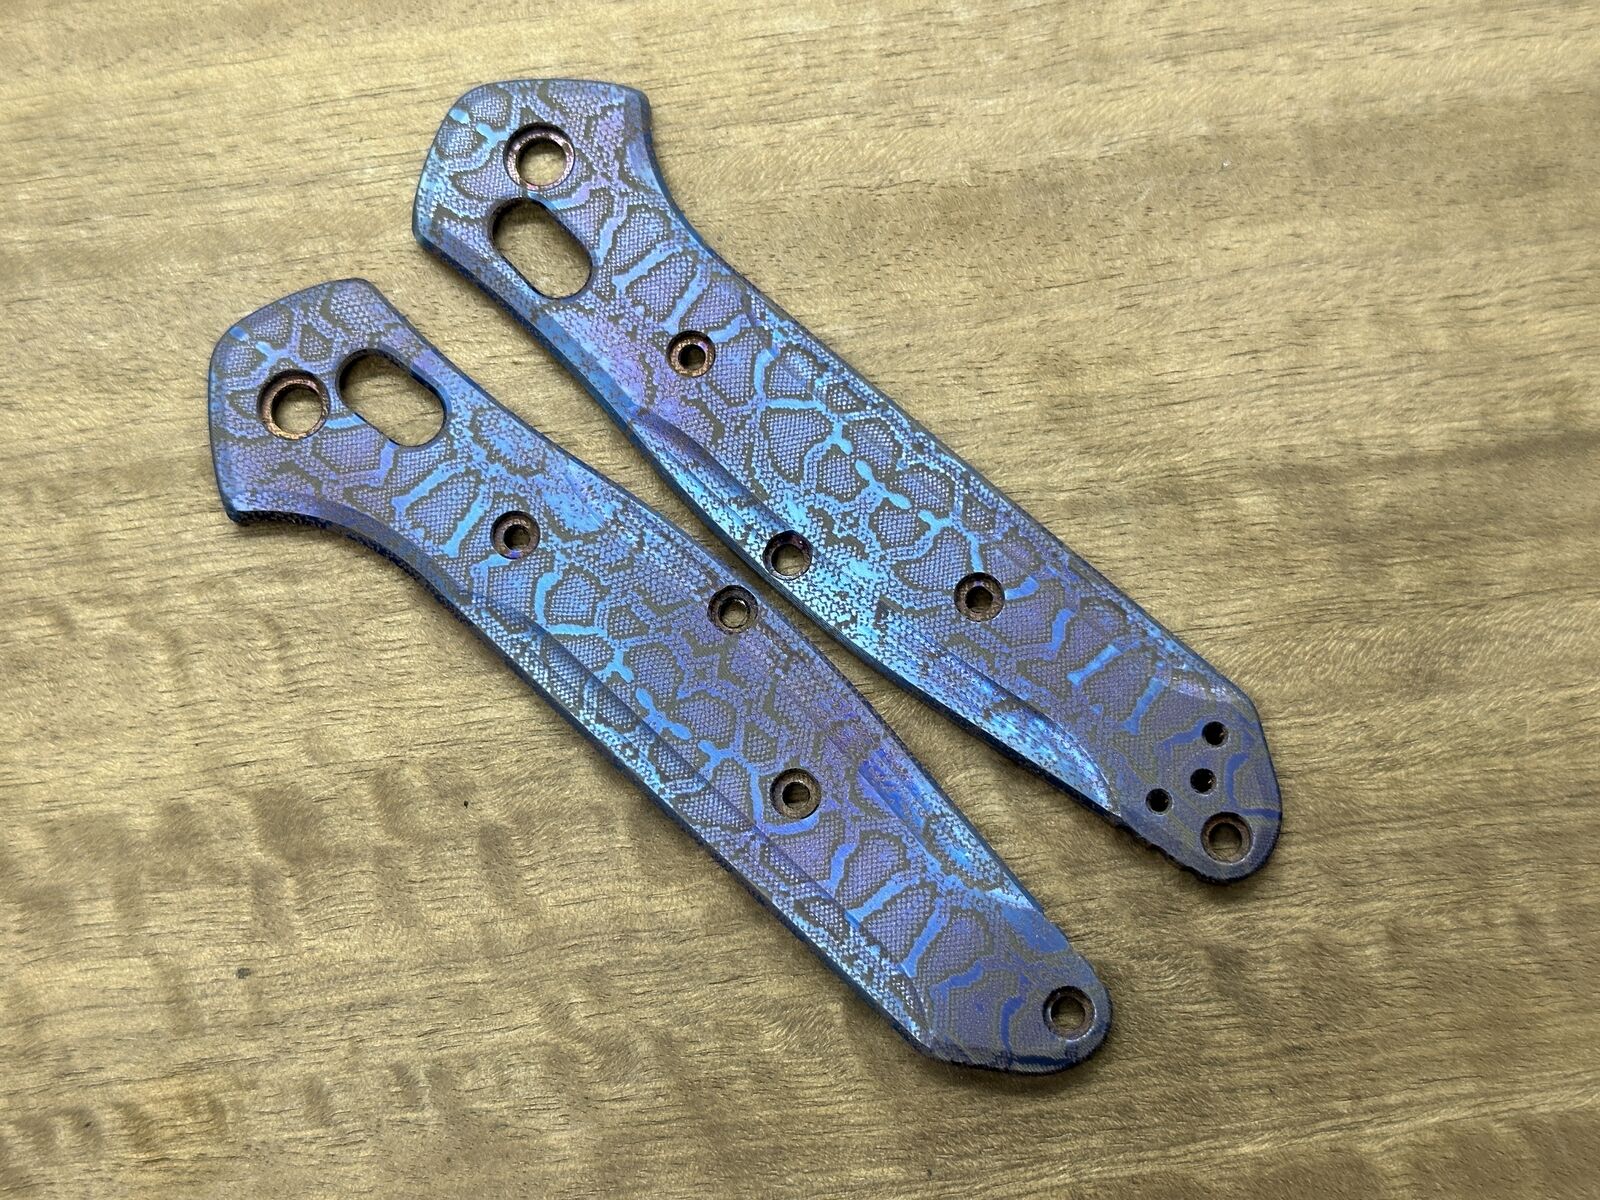 Flamed REPTILIAN engraved Titanium Scales for Benchmade 940 Osborne